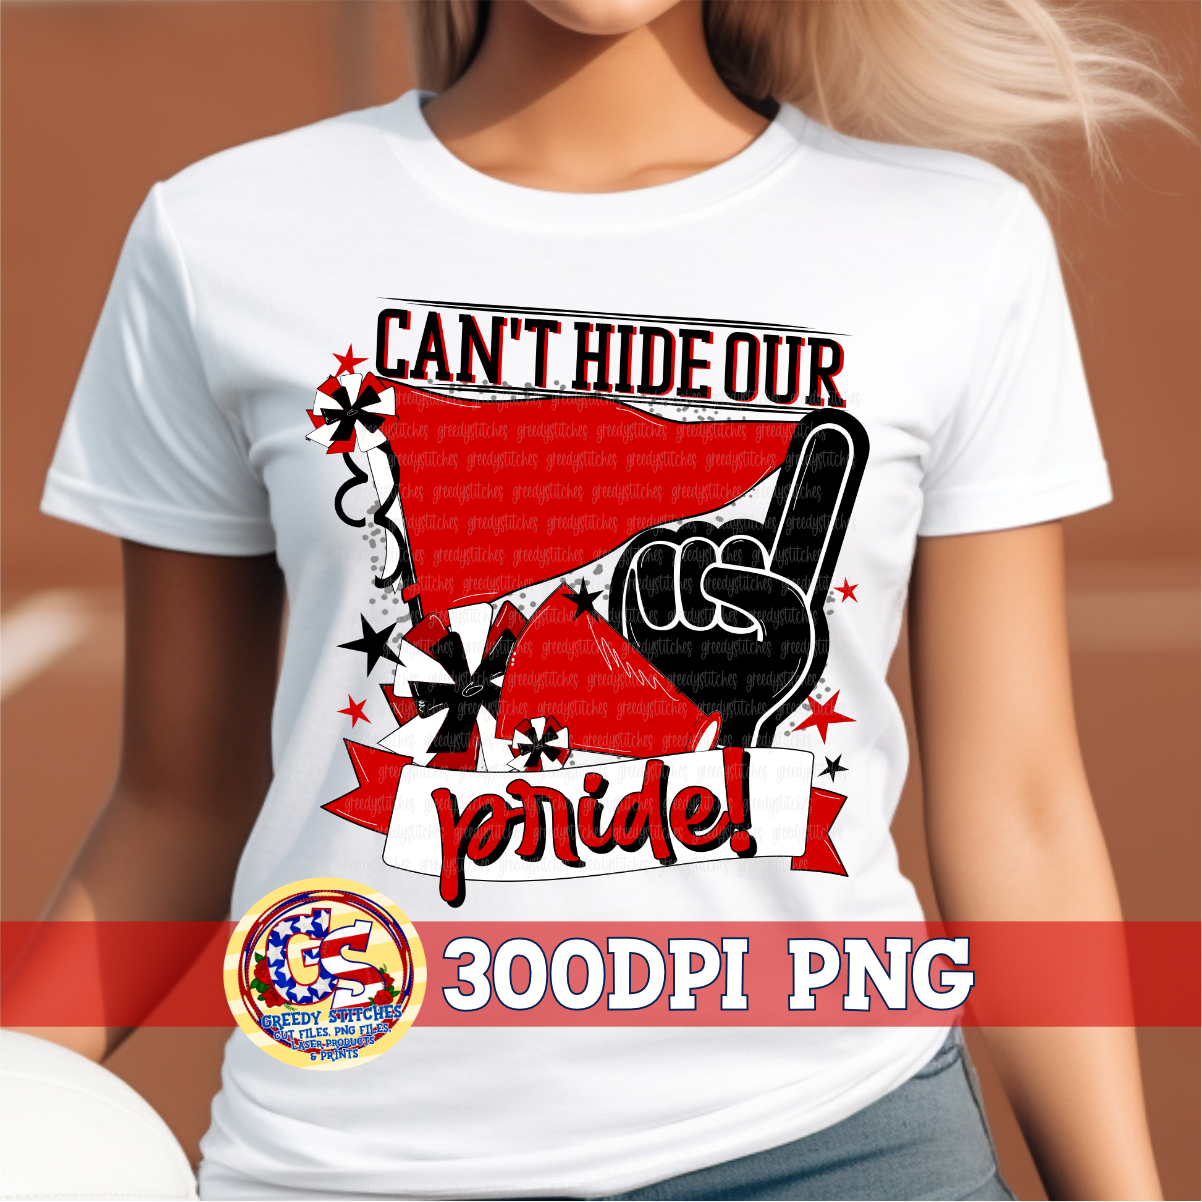 Can't Hide Our Pride Red & Black PNG